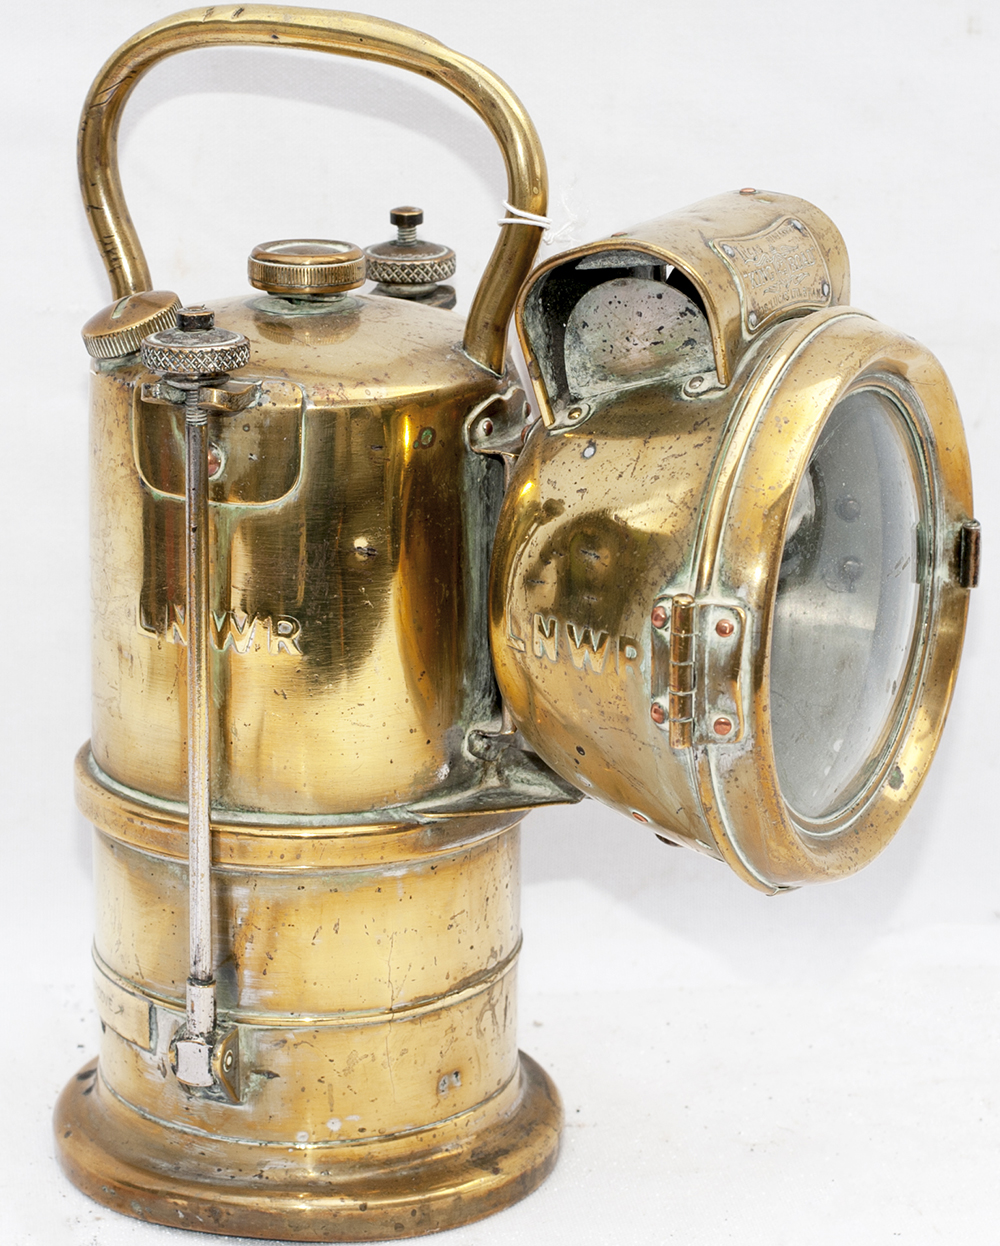 LNWR brass carbide examiner's Hand lamp made by LUCAS King of the road embossed 3 times LNWR.